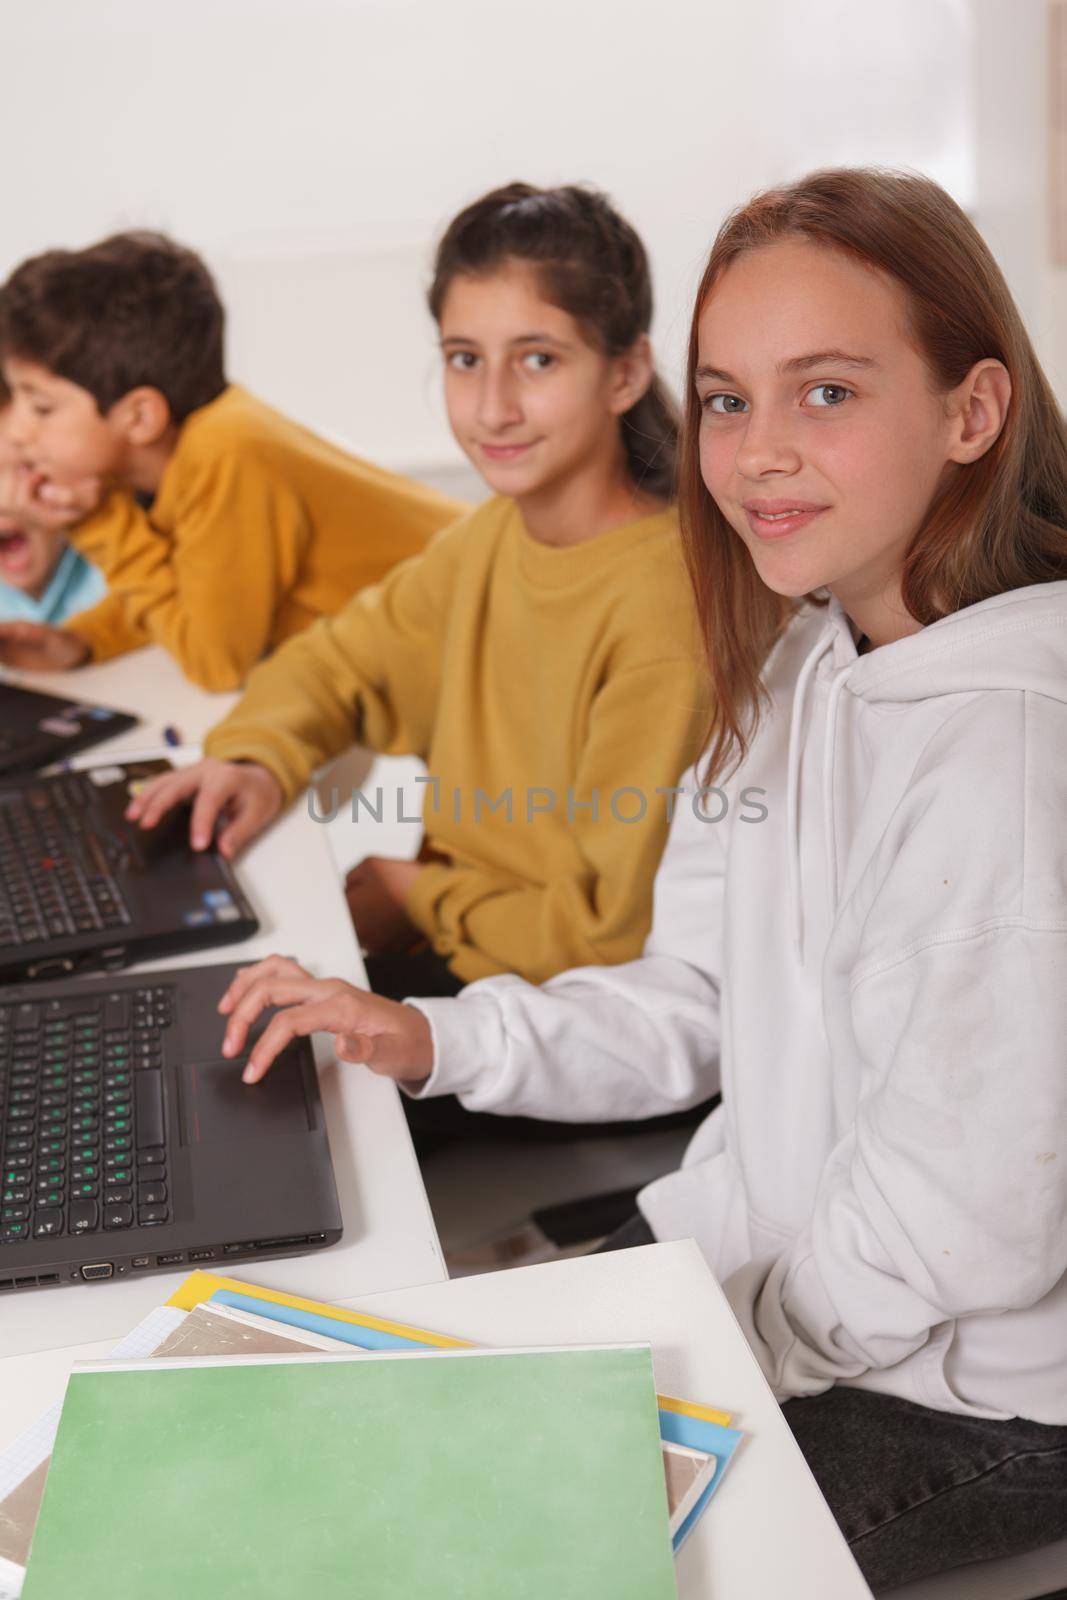 Kids studying together at computer school by MAD_Production